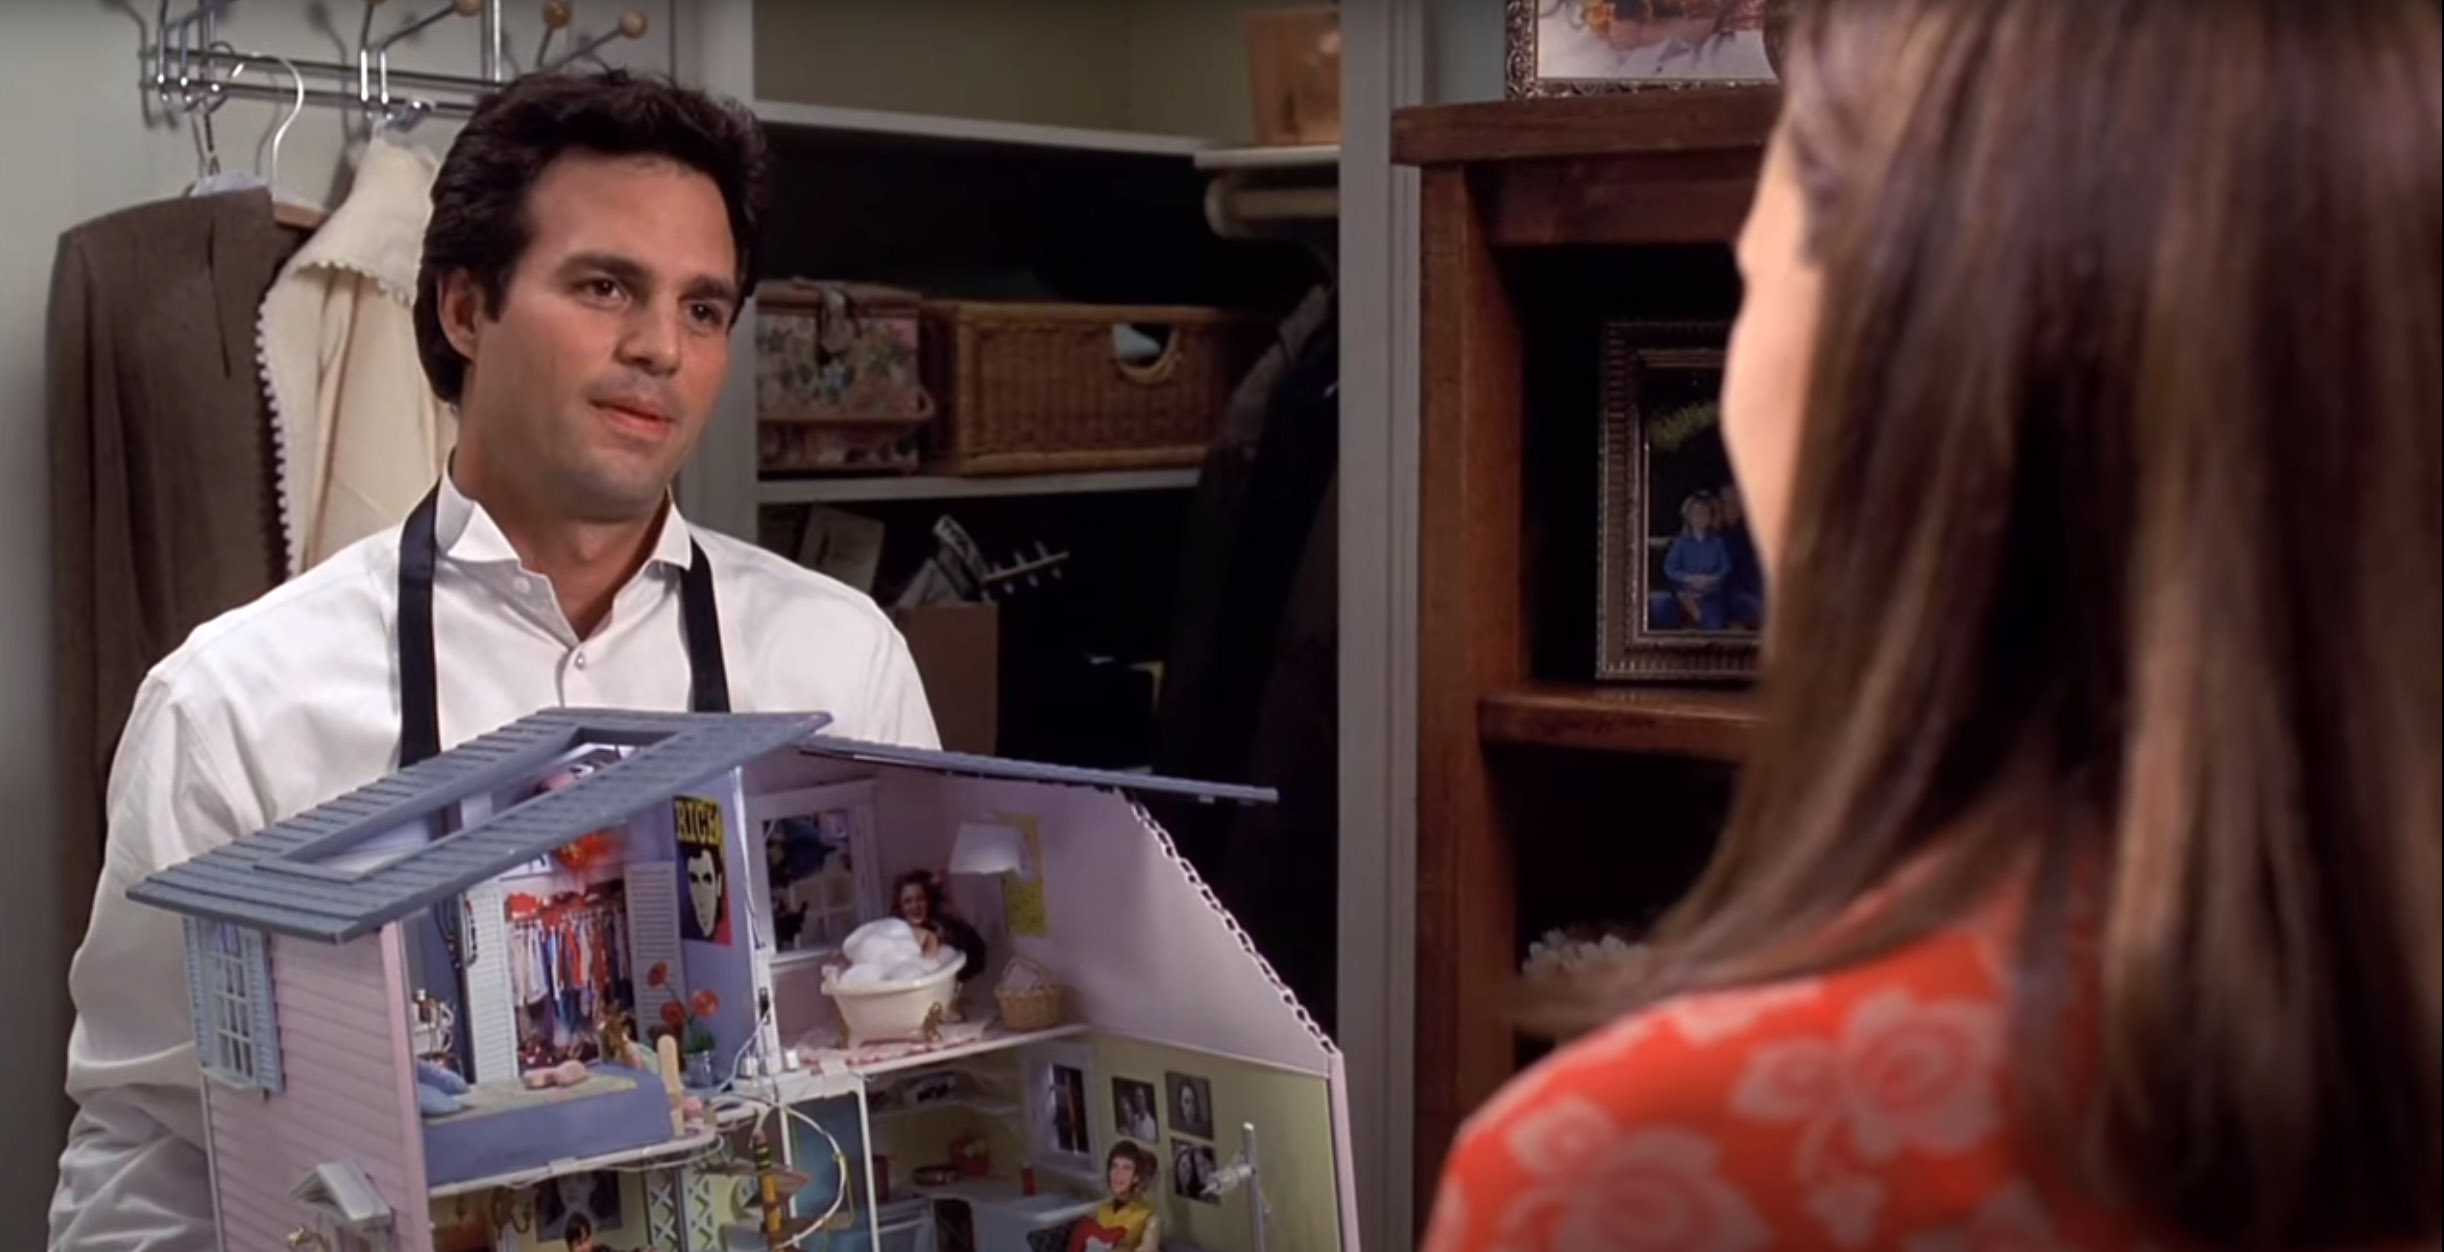 PHOTO: Mark Ruffalo and Jennifer Garner are pictured in a scene from the movie "13 Going on 30."